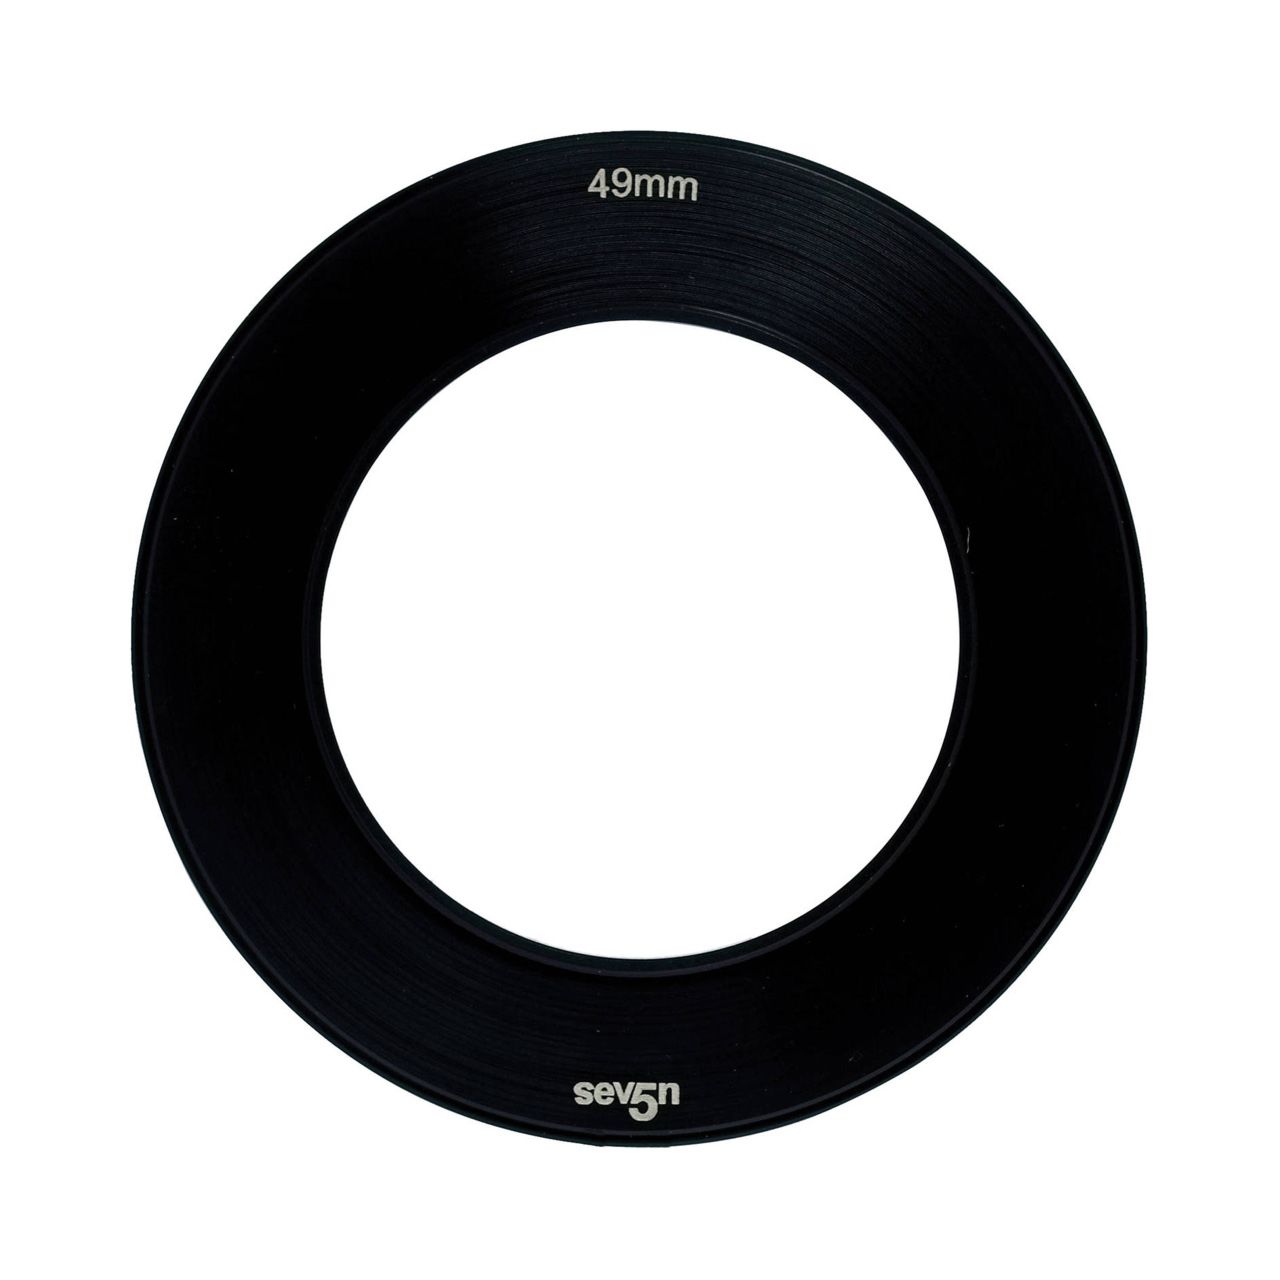 LEE Filters Seven5 Adapter Ring 49Mm